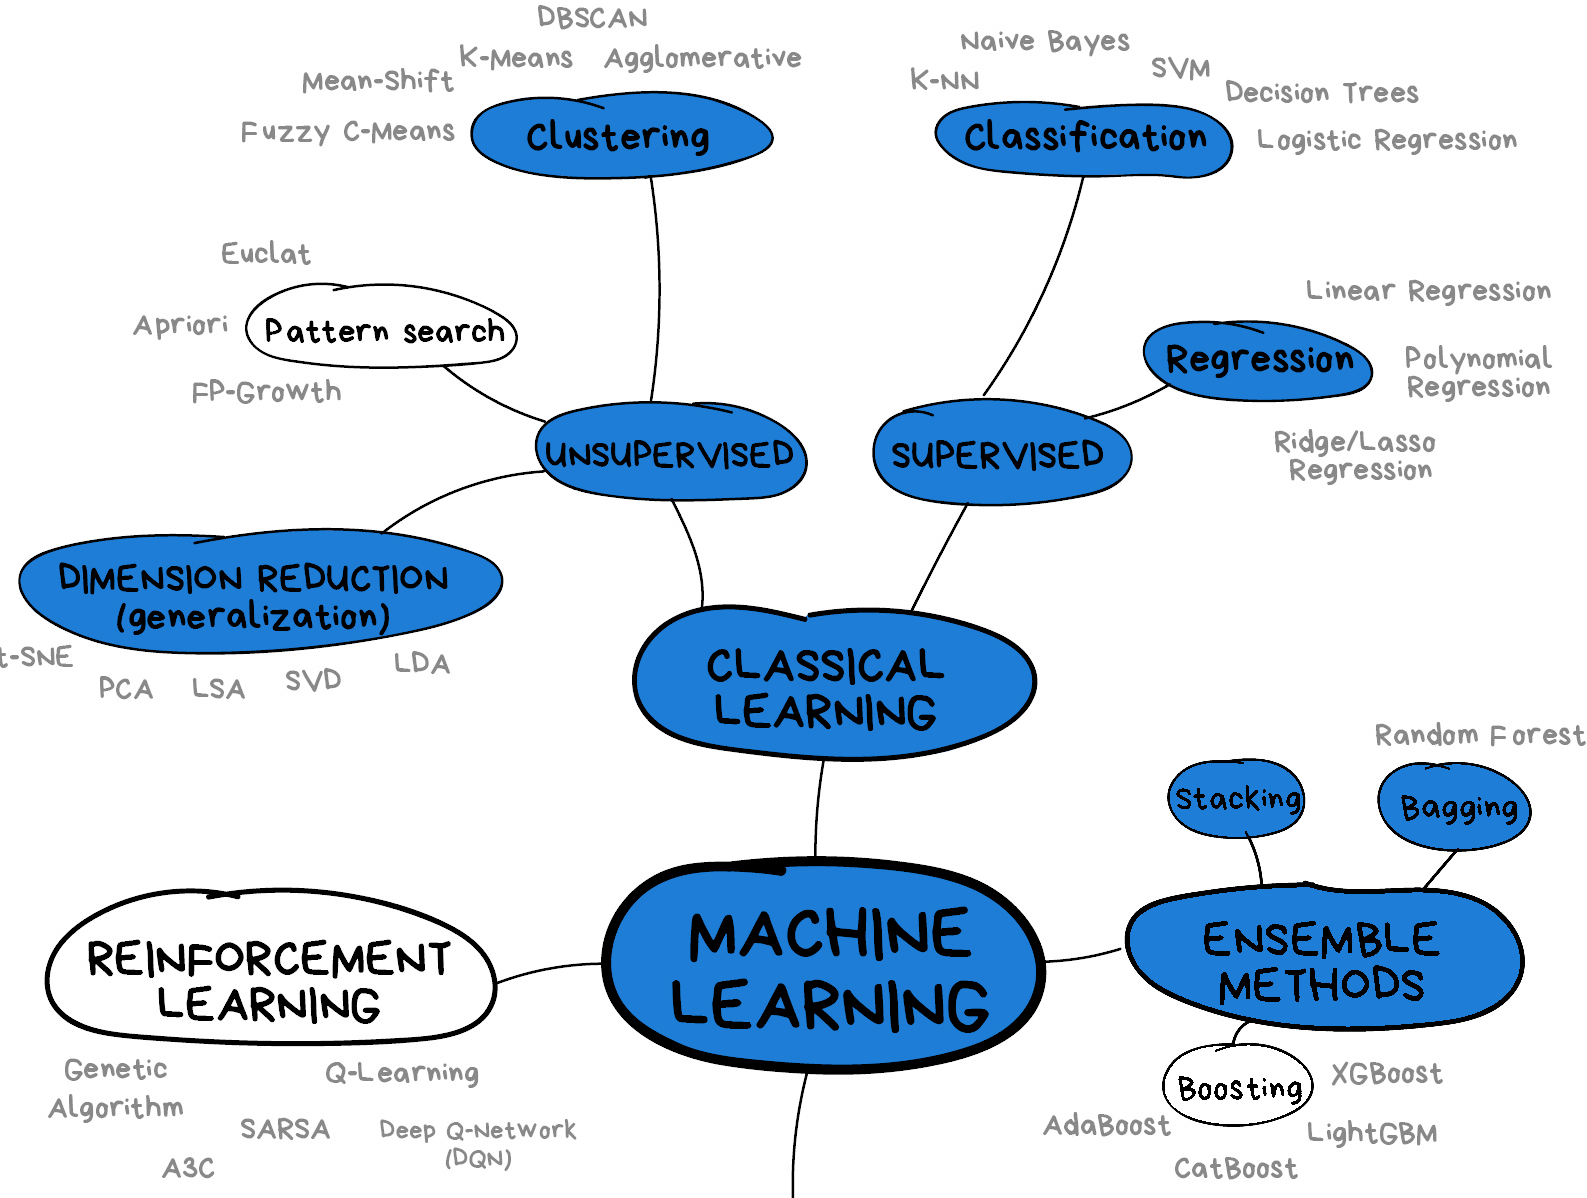 Types of Machine Learning